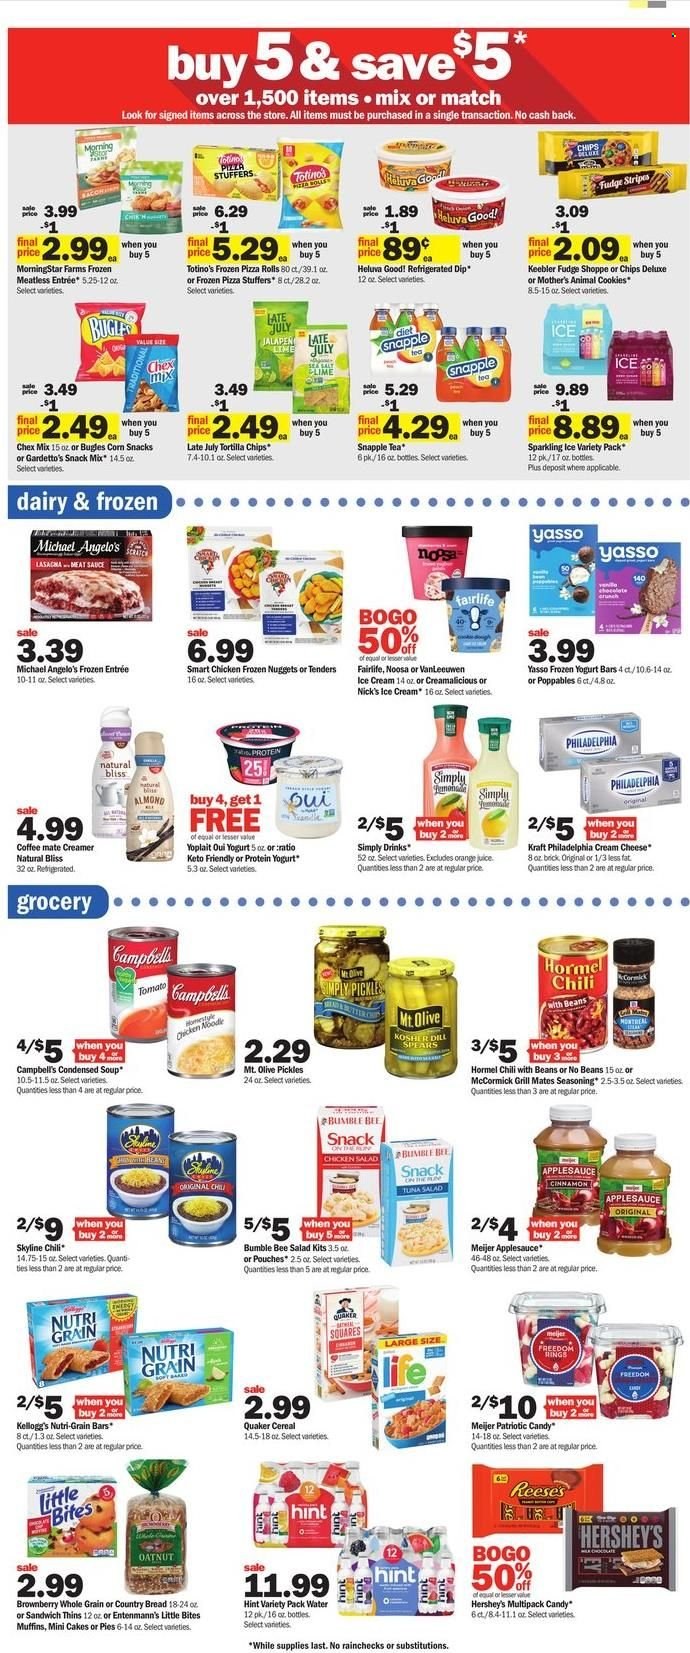 thumbnail - Meijer Flyer - 05/22/2022 - 05/28/2022 - Sales products - bread, cake, pizza rolls, muffin, Entenmann's, salad, tuna, Campbell's, pizza, sandwich, condensed soup, soup, nuggets, Bumble Bee, sauce, Quaker, instant soup, MorningStar Farms, Kraft®, Hormel, tuna salad, chicken salad, cream cheese, Philadelphia, Yoplait, Coffee-Mate, creamer, dip, ice cream, Reese's, Hershey's, Nick's Ice Cream, cookies, fudge, snack, Kellogg's, Nutri-Grain bars, Little Bites, Keebler, tortilla chips, Thins, Chex Mix, pickles, cereals, Nutri-Grain, dill, spice, cinnamon, apple sauce, orange juice, juice, Snapple, tea, grill. Page 5.